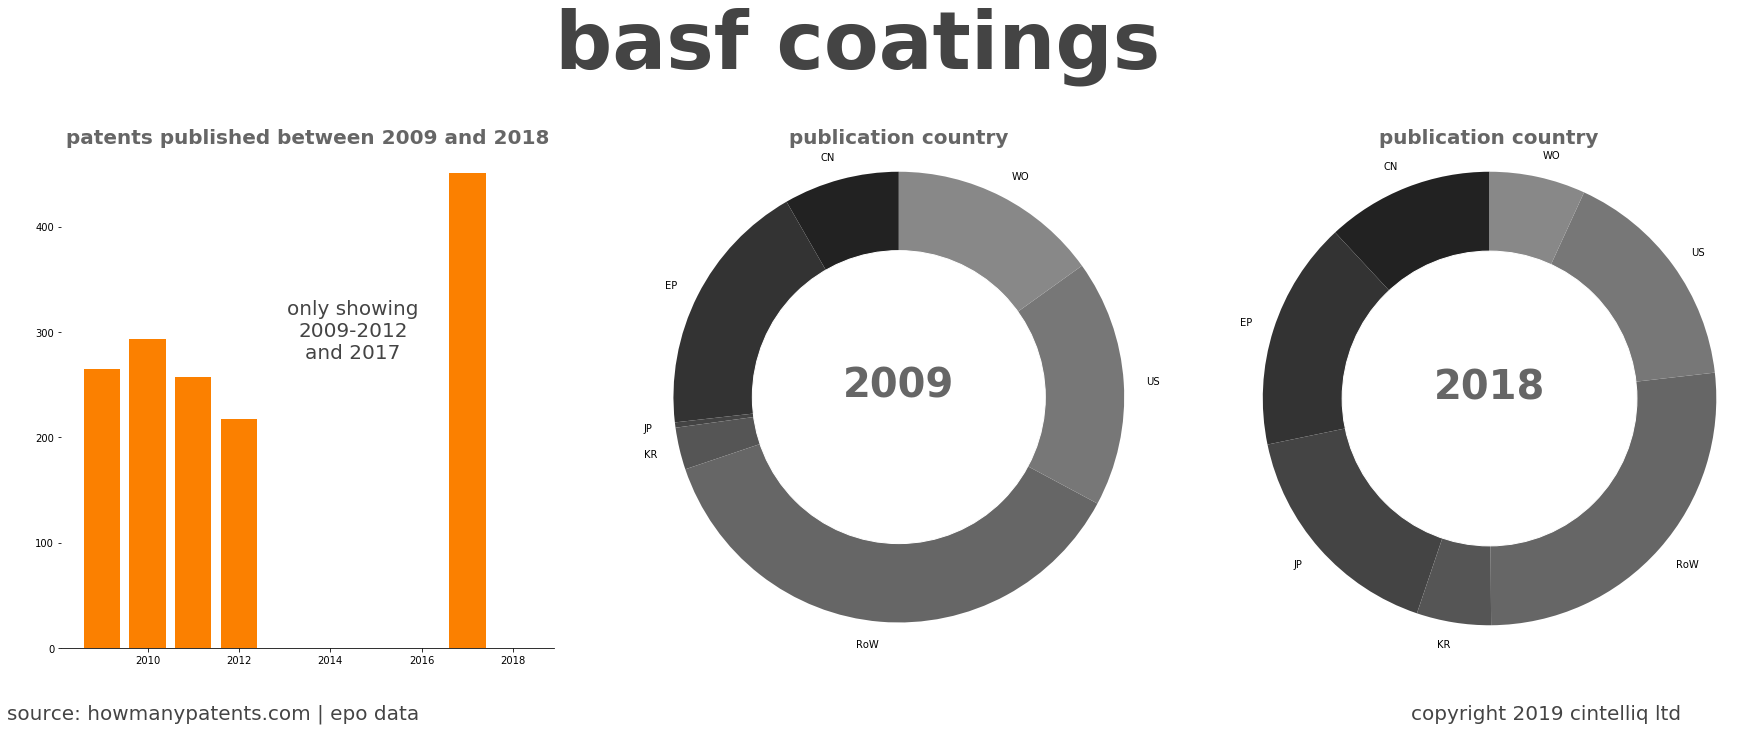 summary of patents for Basf Coatings 